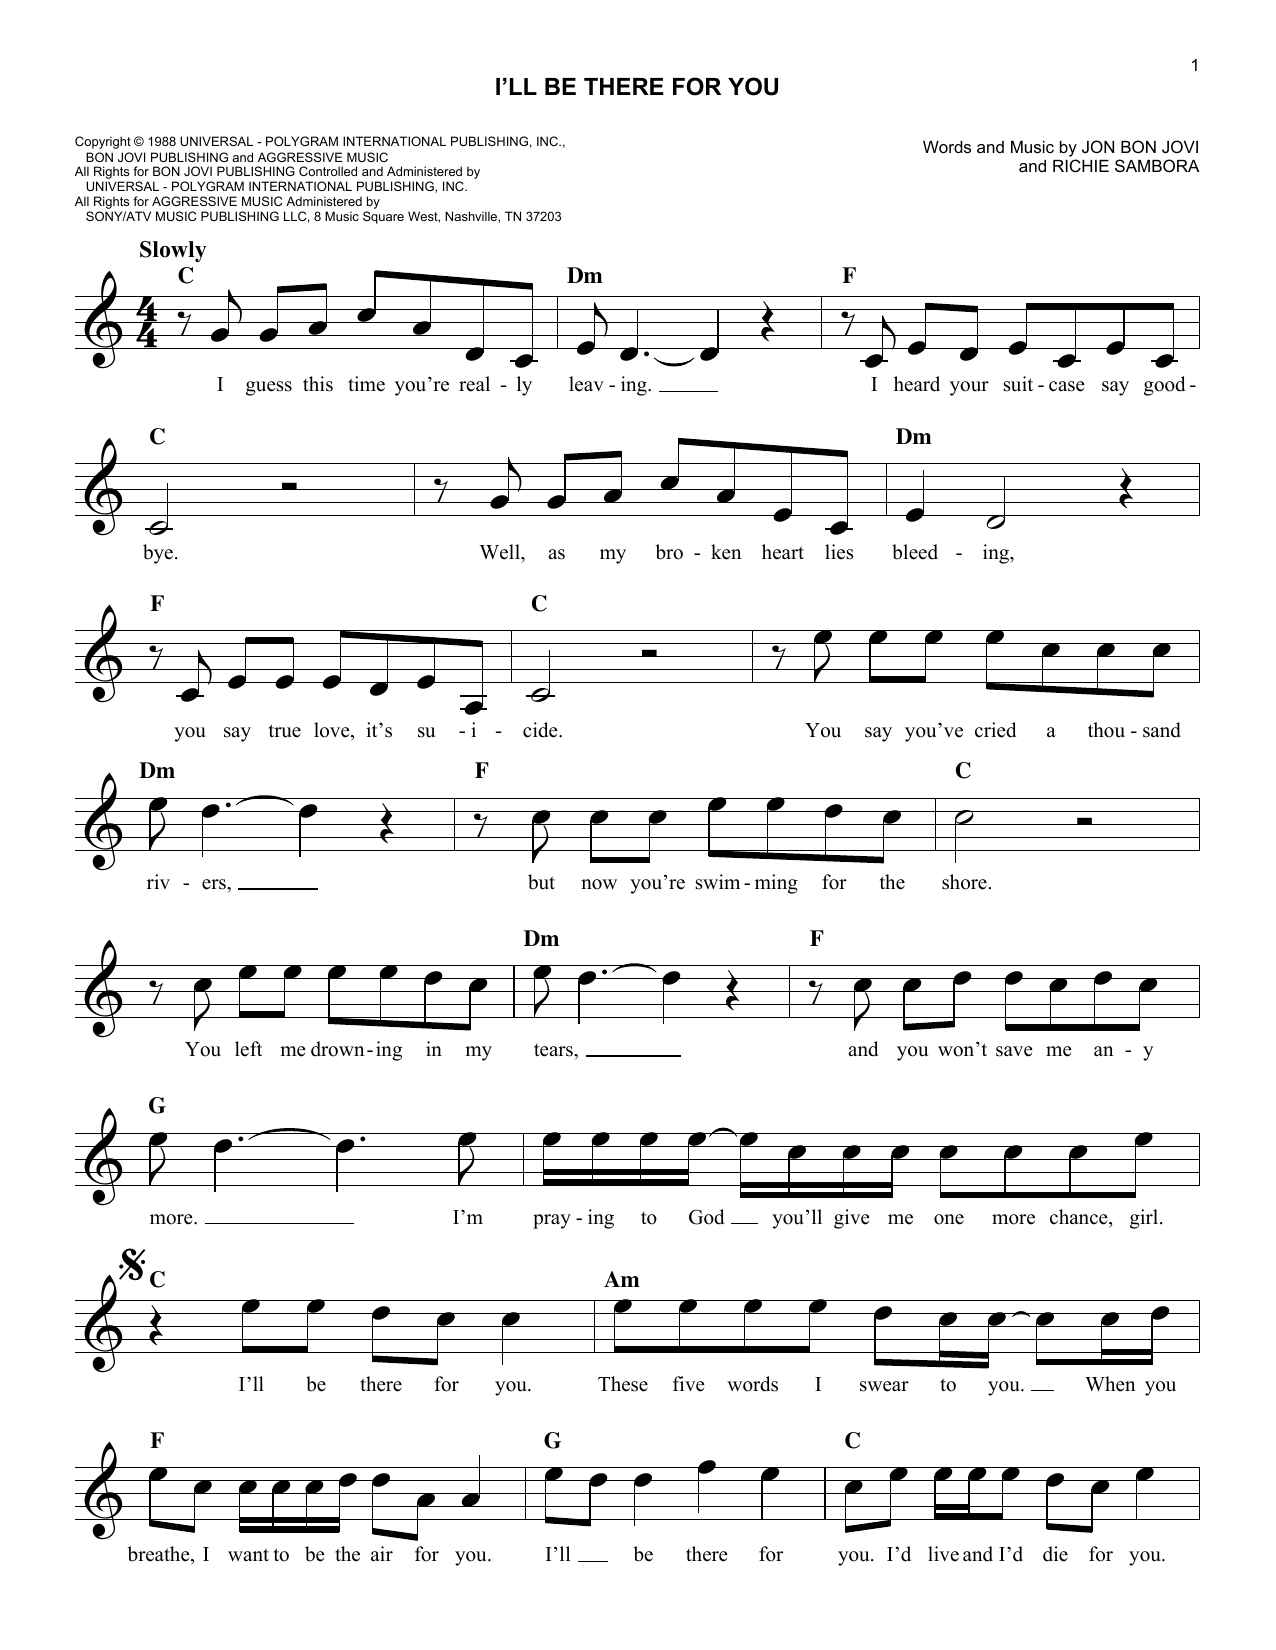 Download Bon Jovi I'll Be There For You Sheet Music